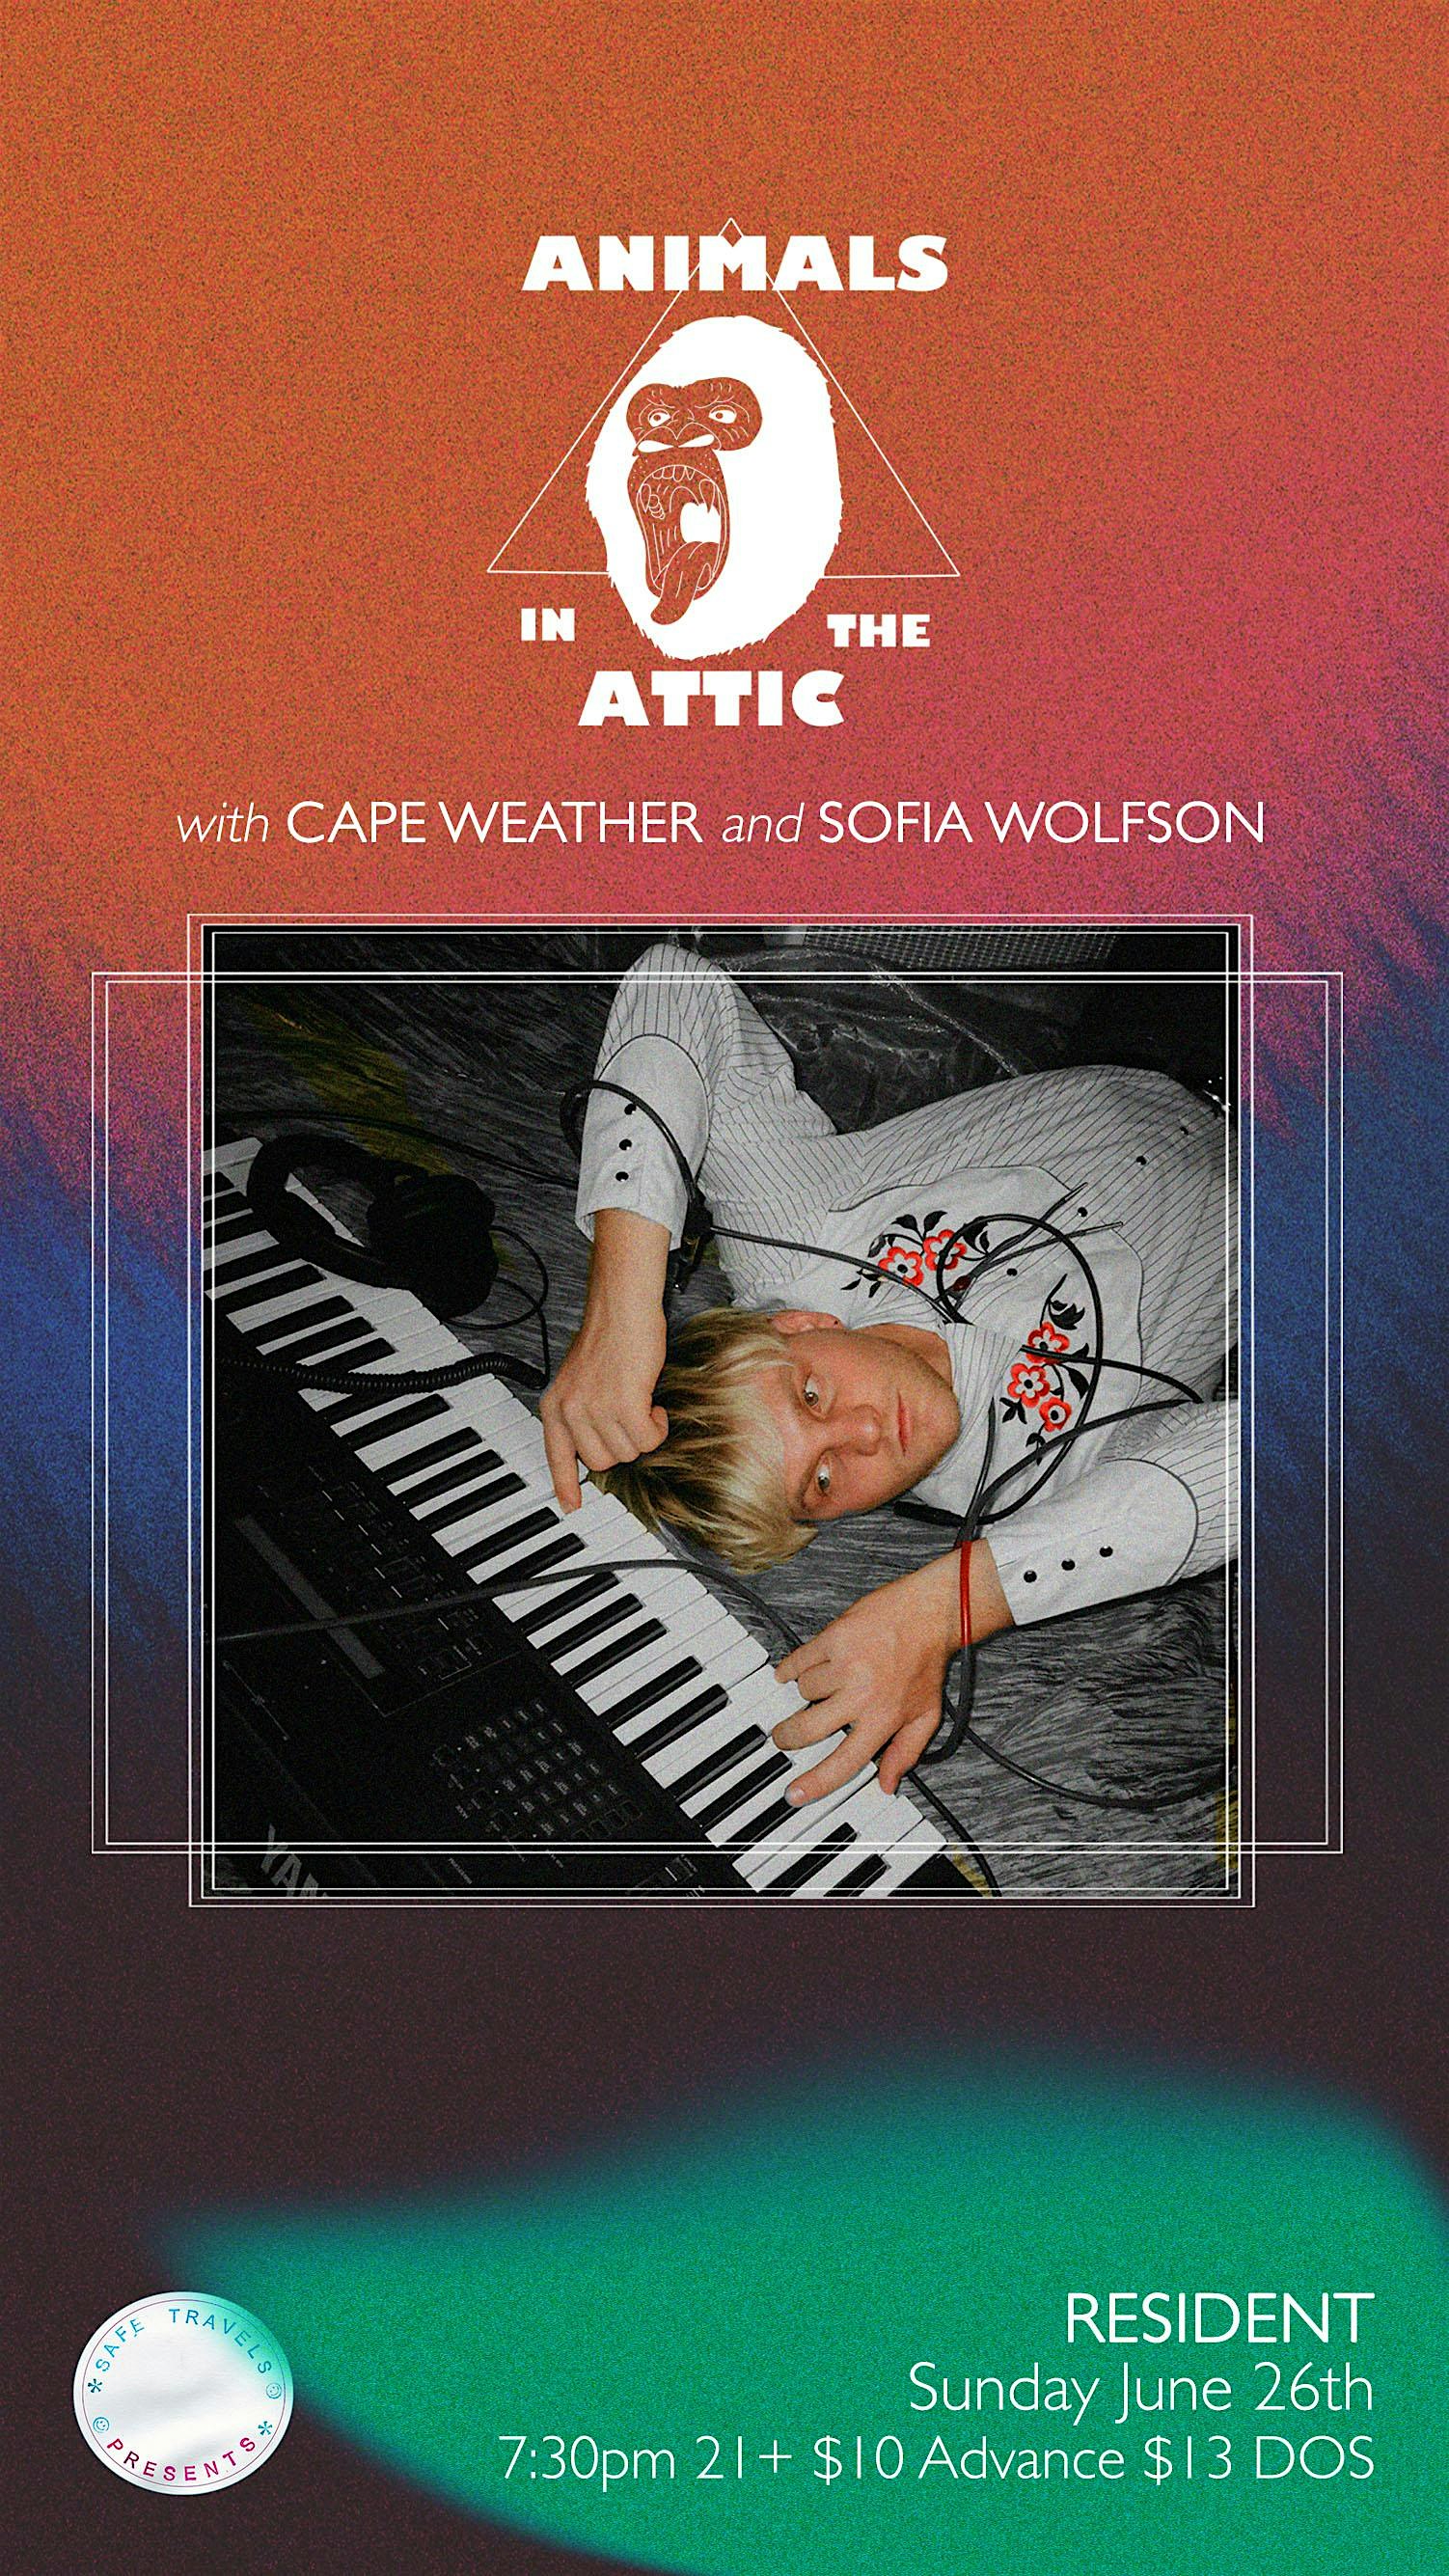 Animals in the Attic with Cape Weather & Sofia Wolfson